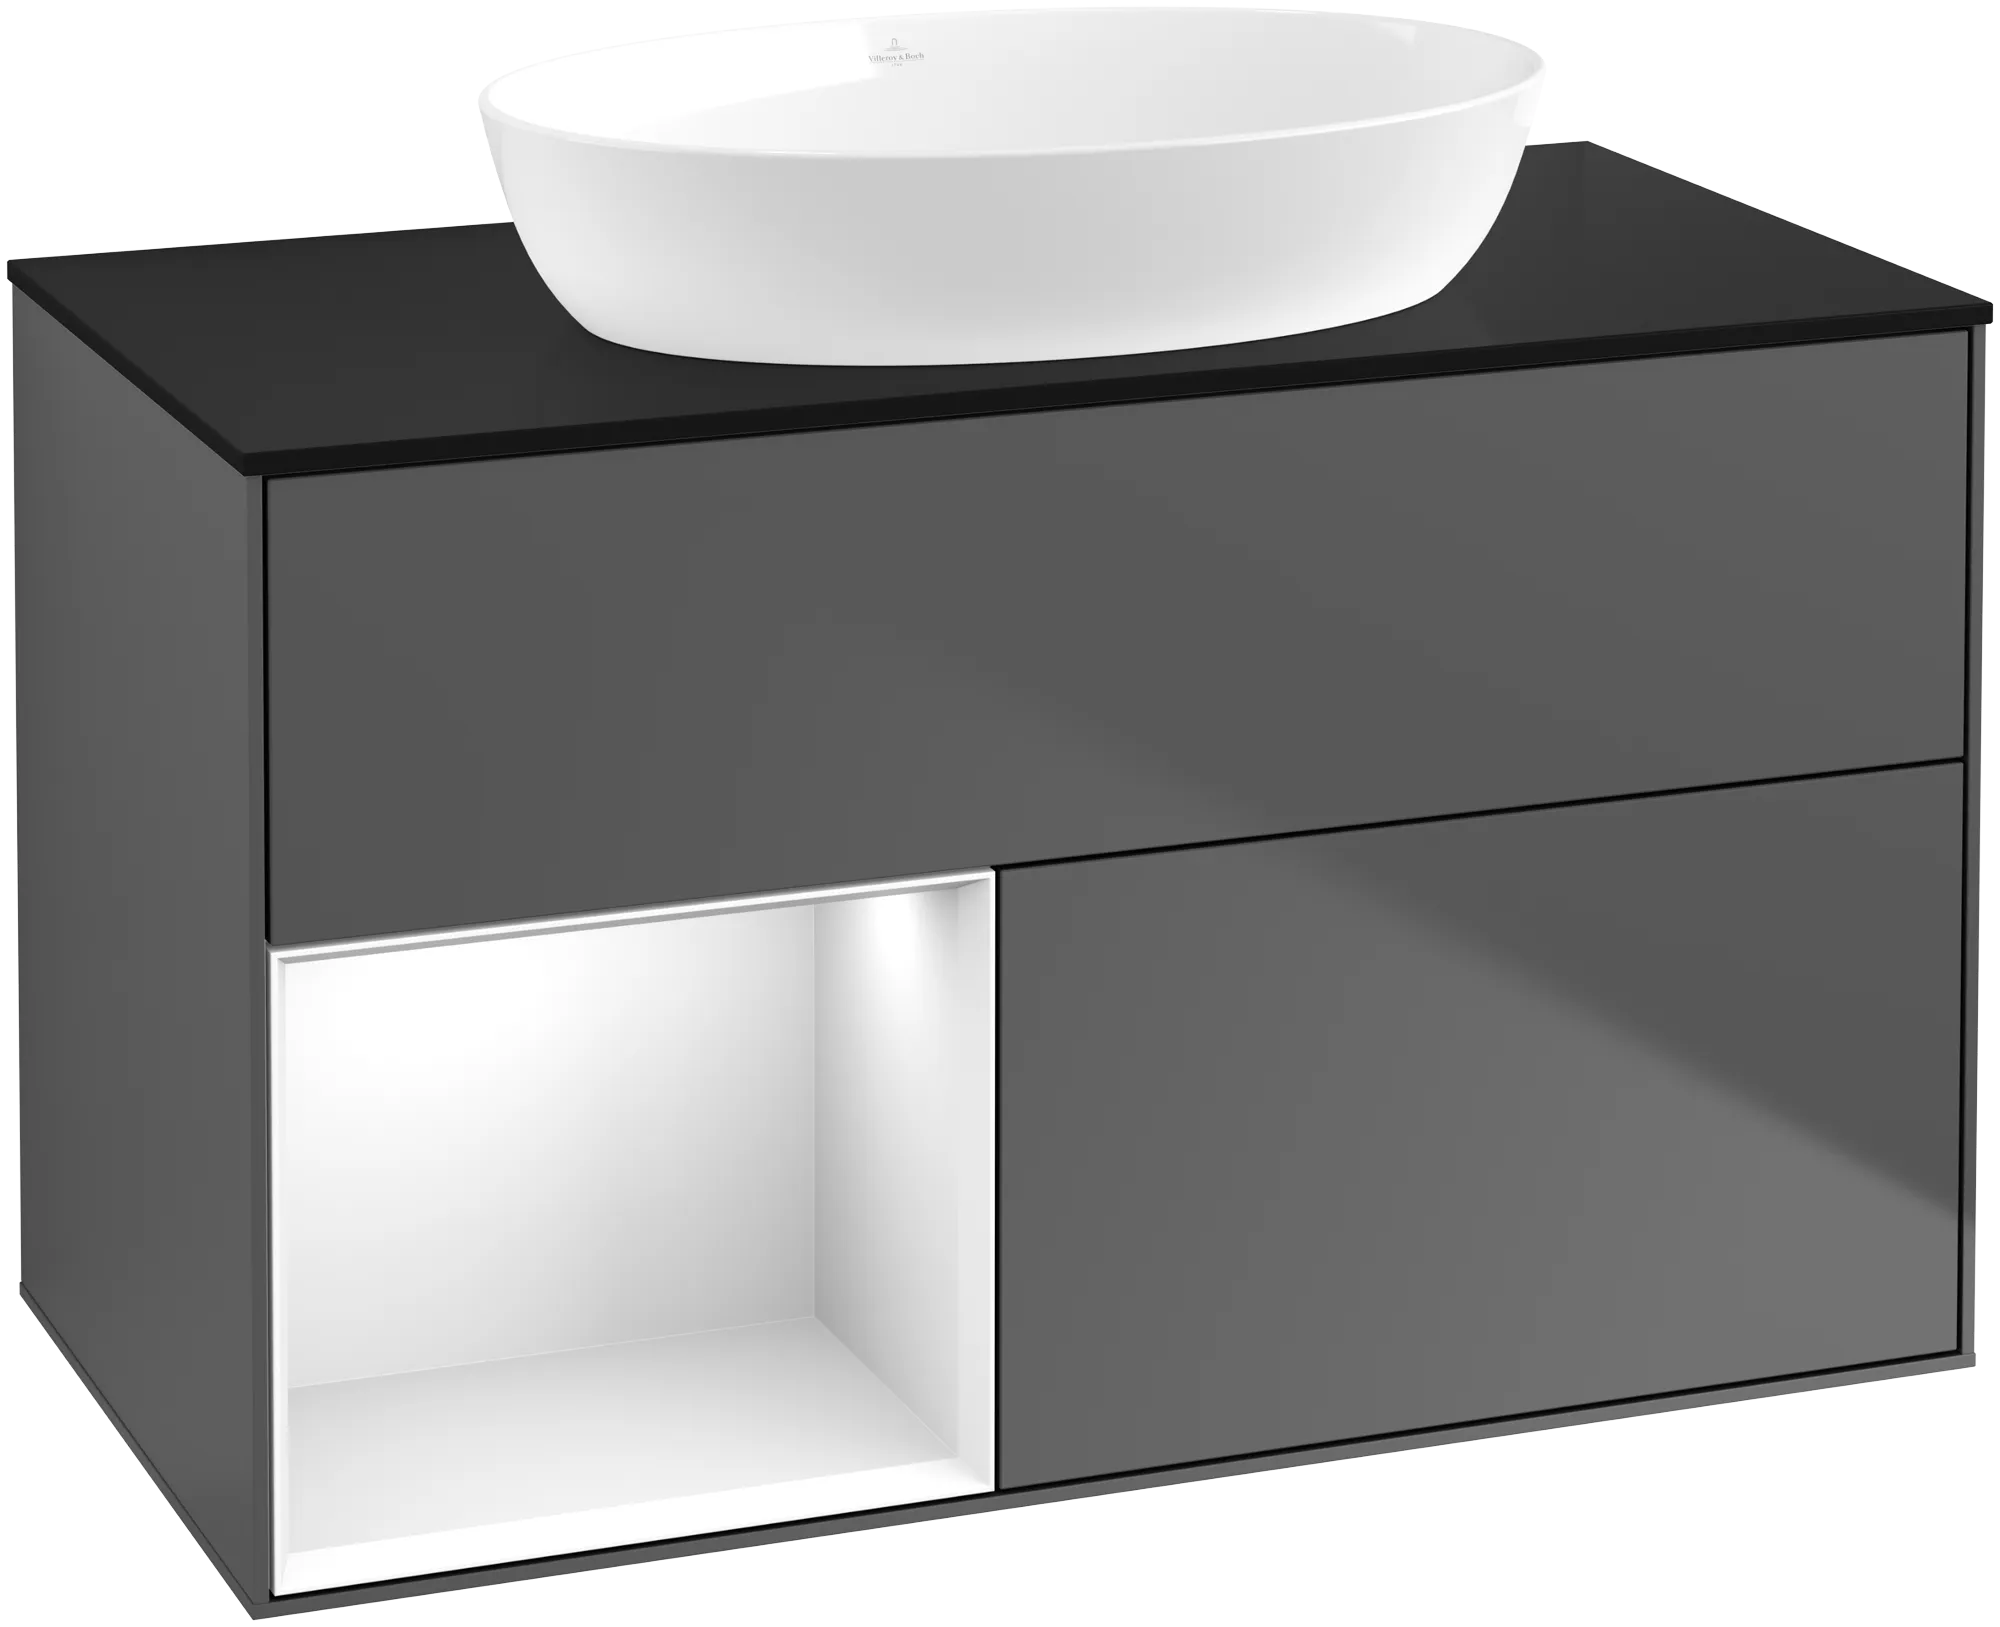 Obrázek VILLEROY BOCH Finion Vanity unit, with lighting, 2 pull-out compartments, 1000 x 603 x 501 mm, Anthracite Matt Lacquer / Glossy White Lacquer / Glass Black Matt #GA12GFGK